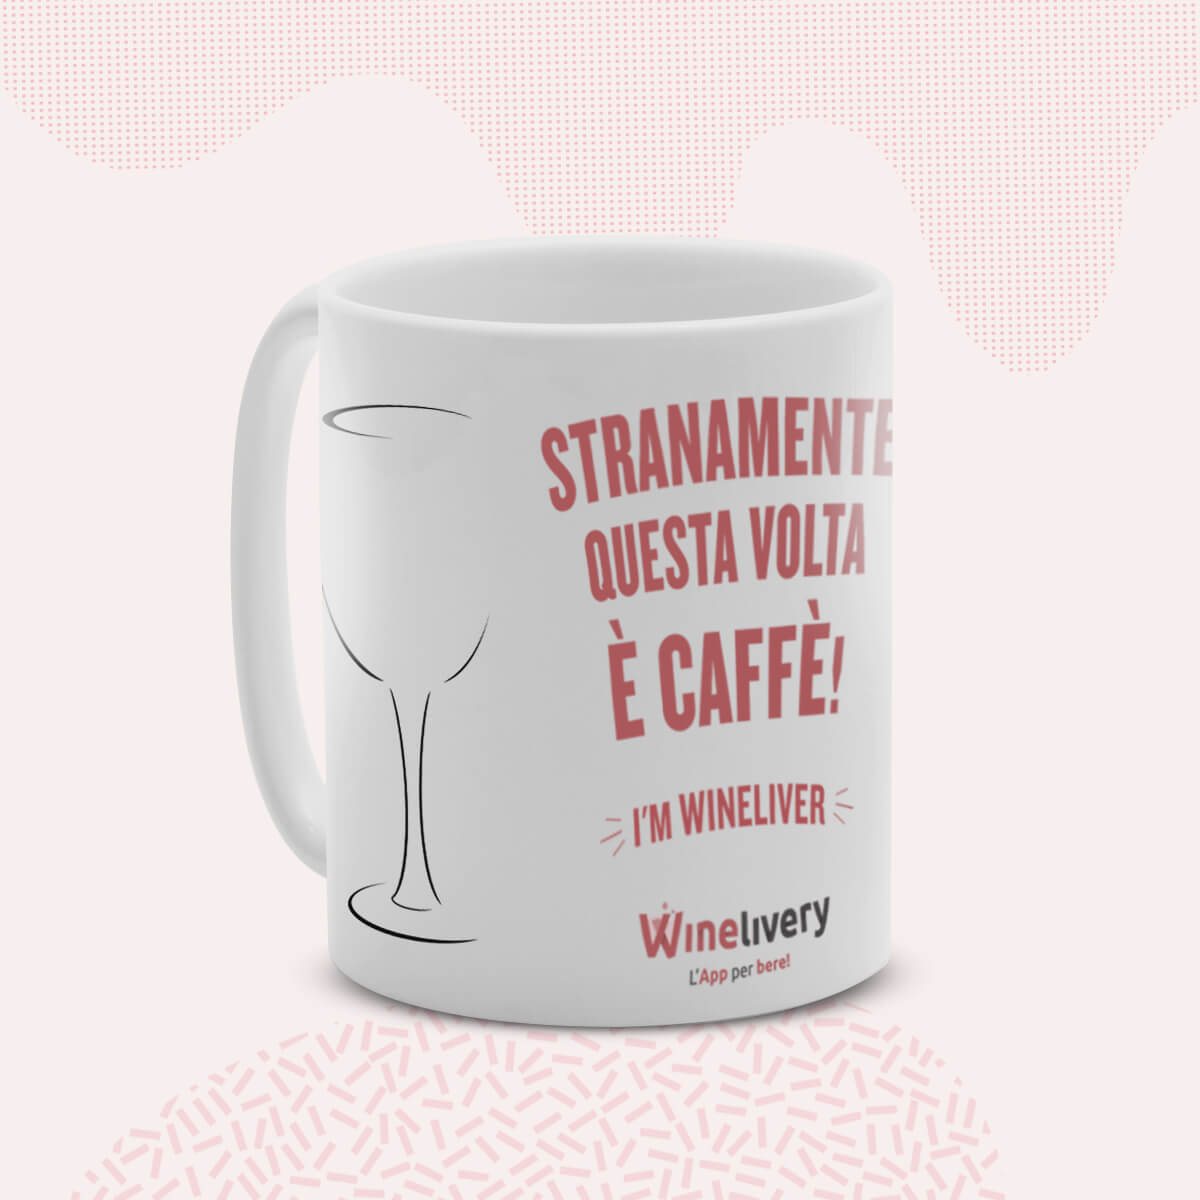 Tazza Winelivery